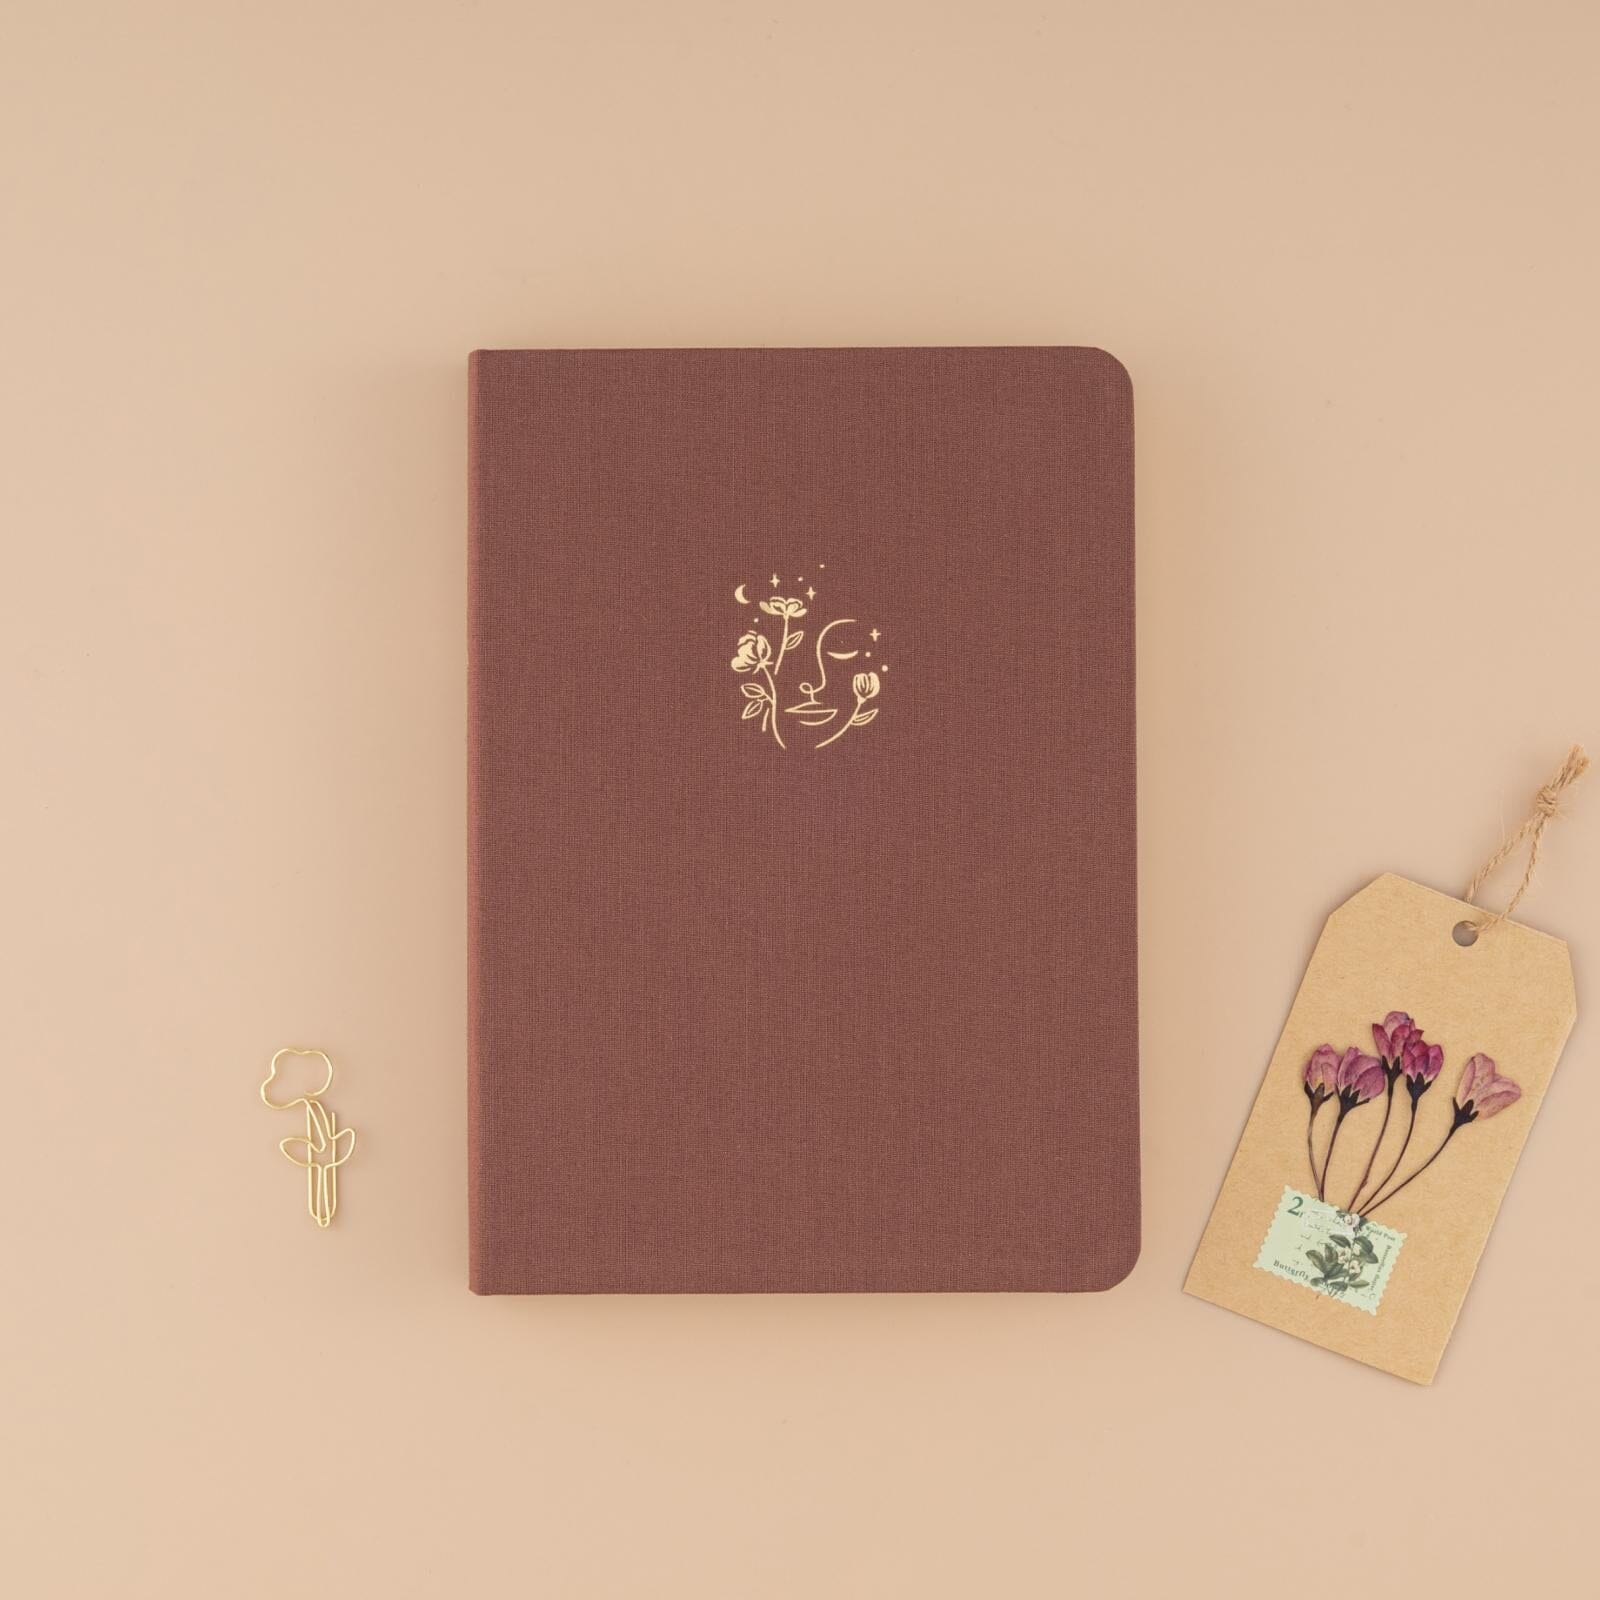 Tsuki ‘Dried Flowers’ Limited Edition Luxury Bullet Journal ☾